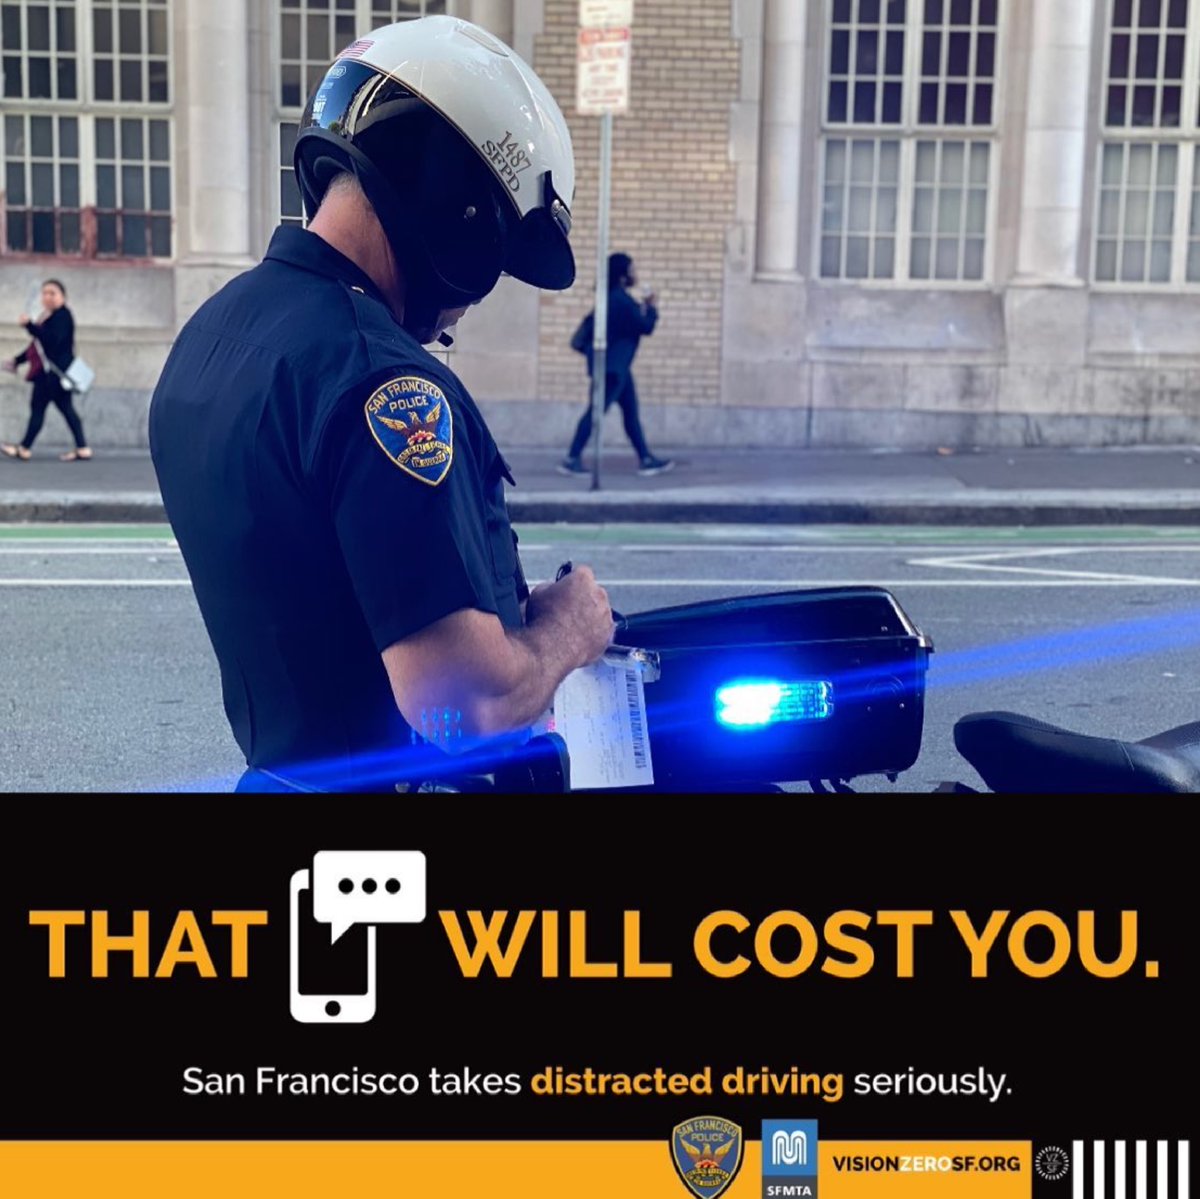 April is Distracted Driving Awareness Month. When you're behind the wheel, your only job is to drive. Do your part to keep our streets safe for everyone, and keep your attention where it belongs - on the road. #JustDrive #ArriveAlive